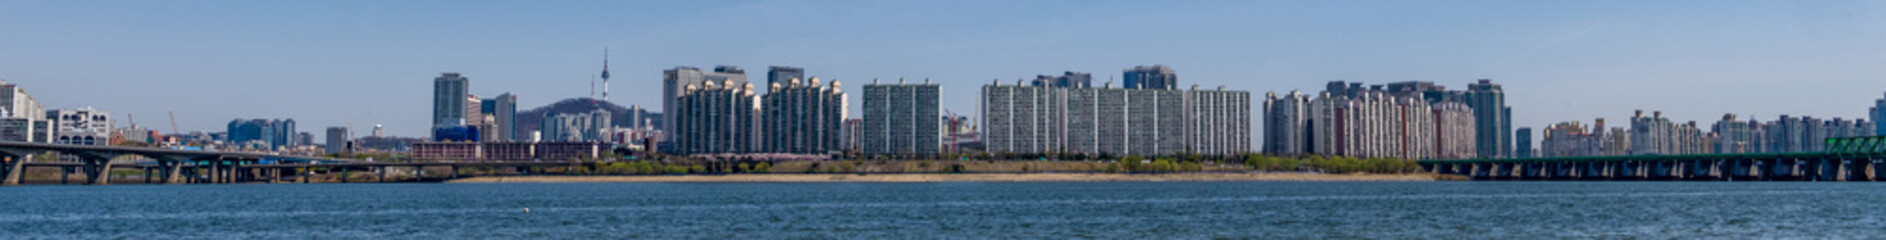 Panorama of a portion of the skyline of Seoul, South Korea with the Han River